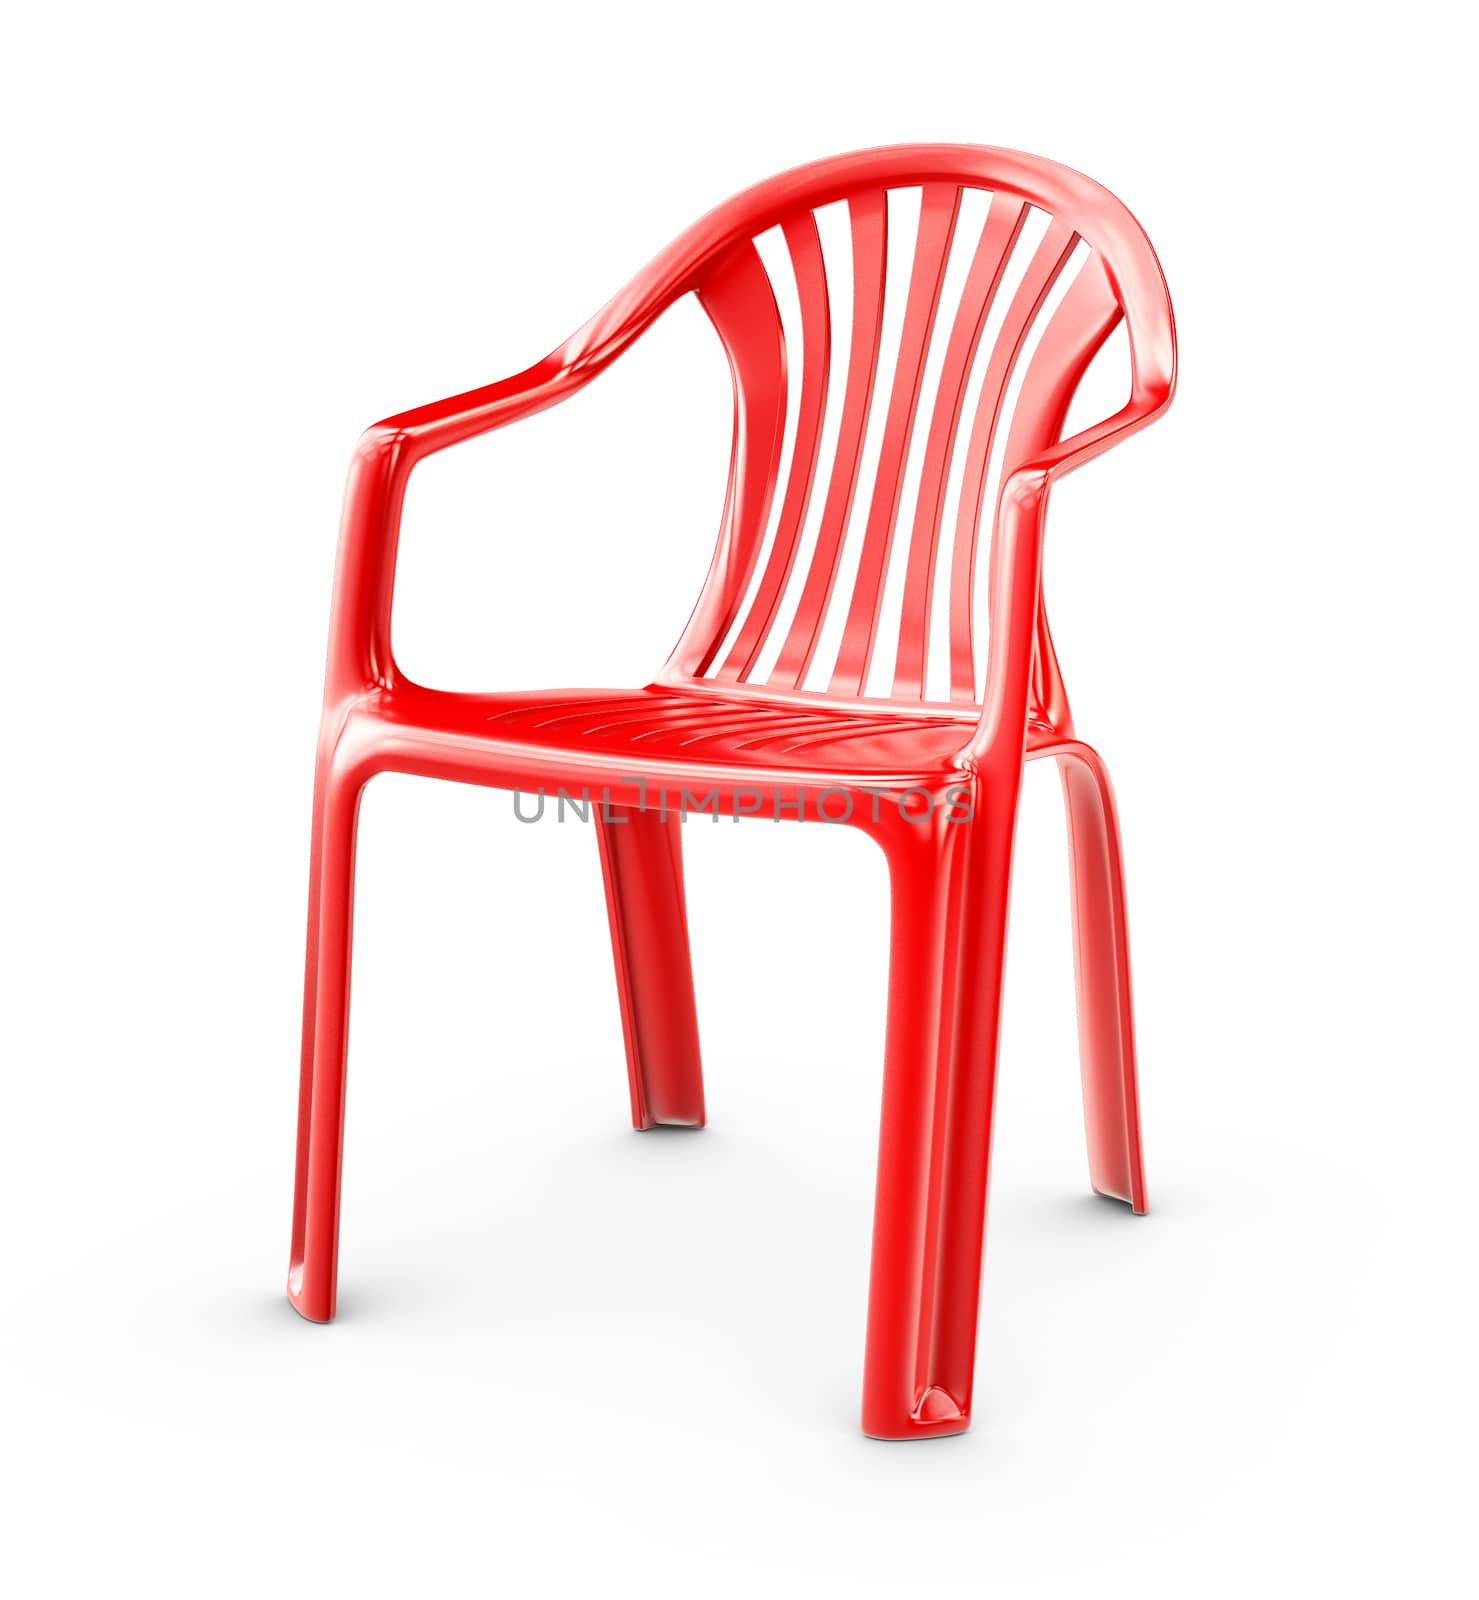 3d Rendering of Red plastic chair on a white background.